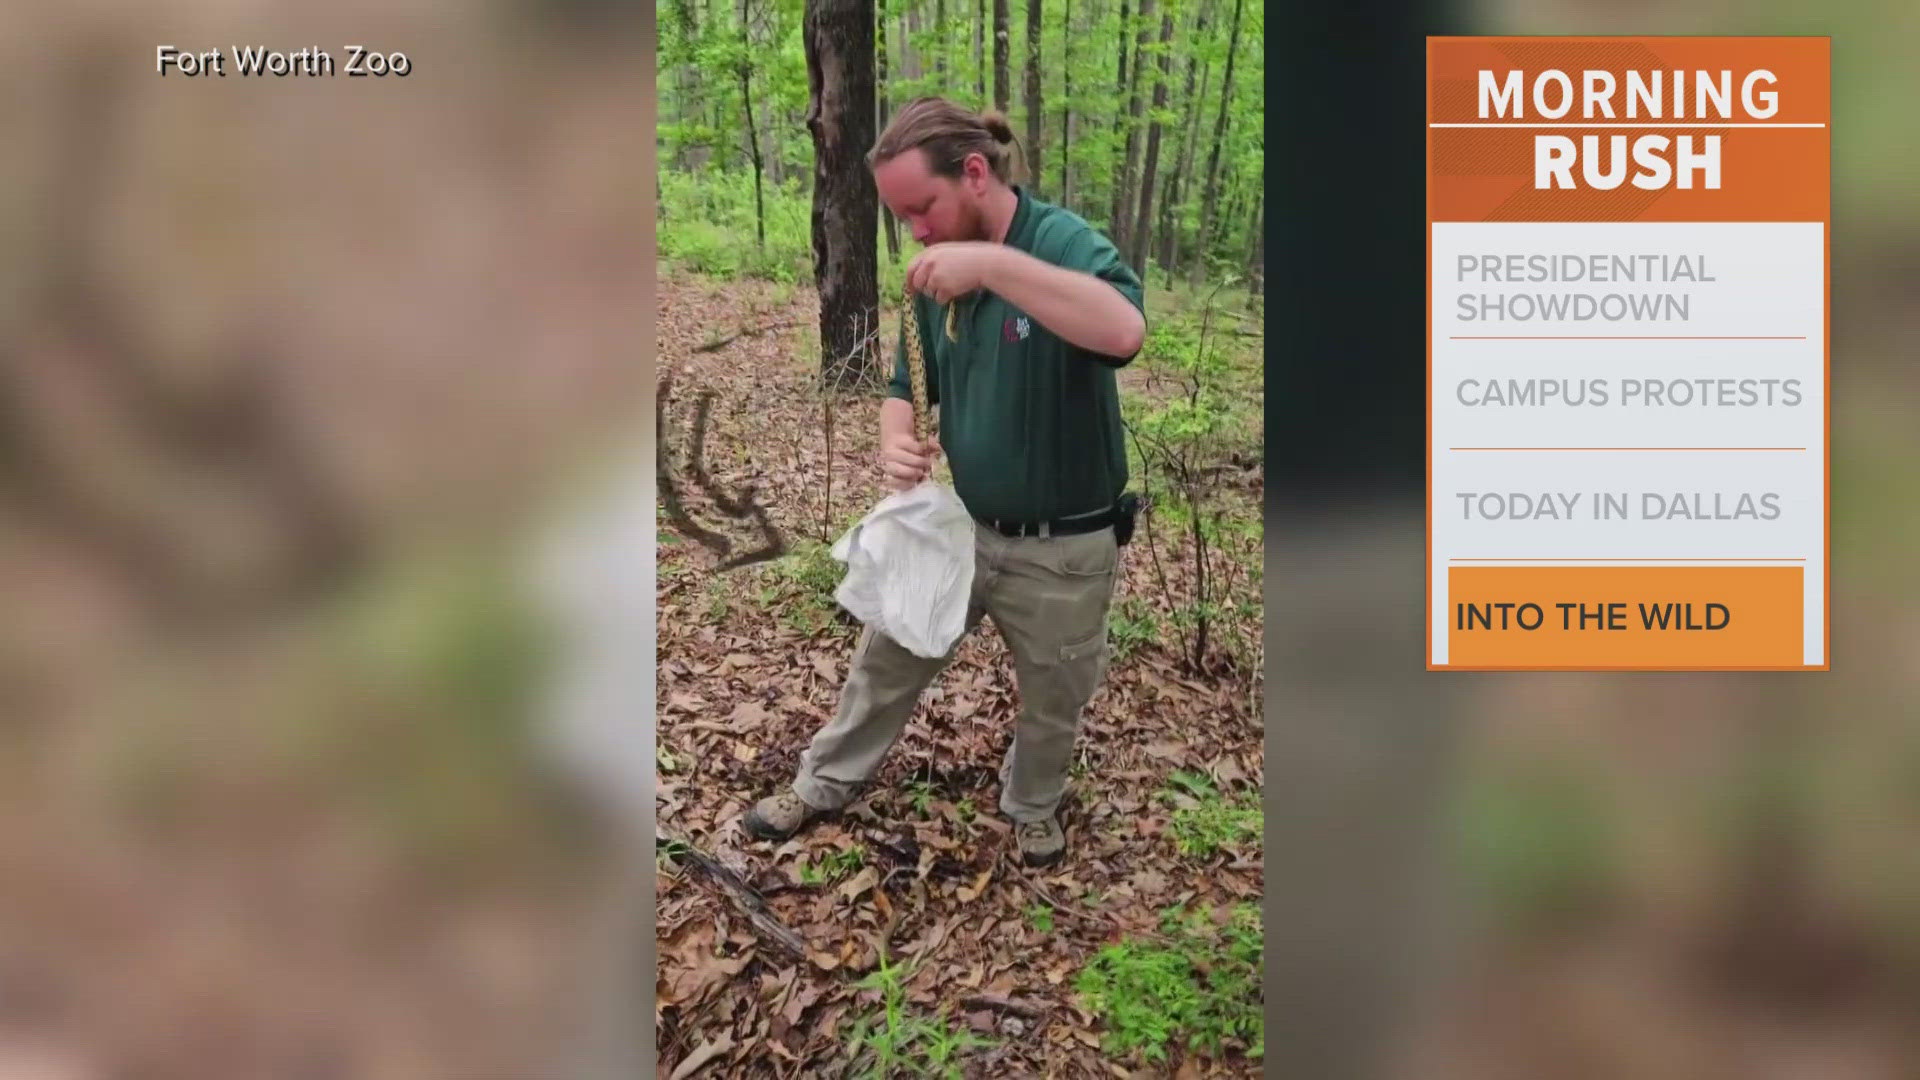 The snakes were released into the wild in Louisiana, officials said.